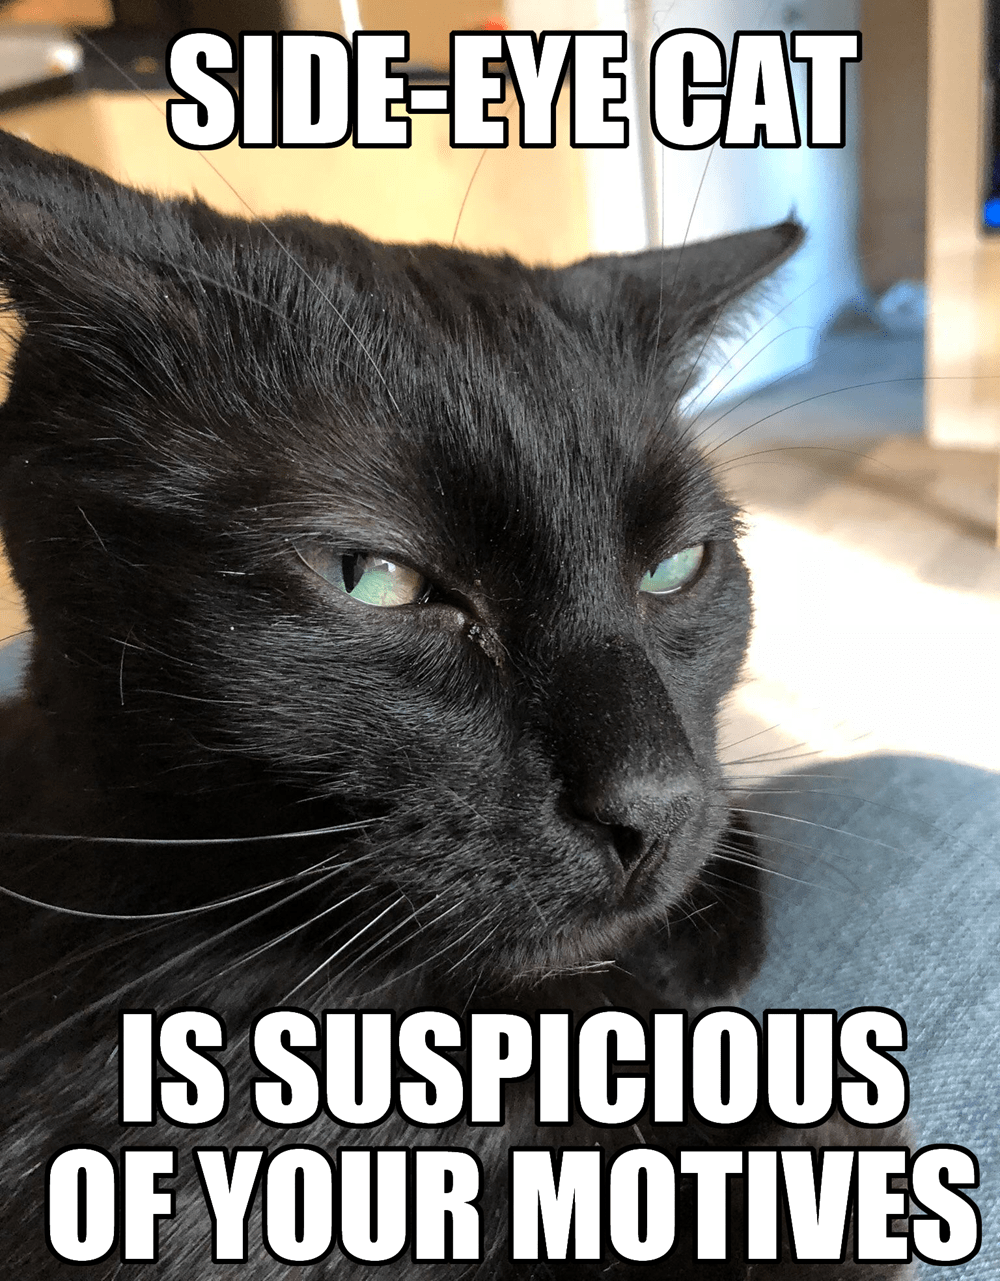 Lookin' sus - Lolcats - lol, cat memes, funny cats, funny cat  pictures with words on them, funny pictures, lol cat memes